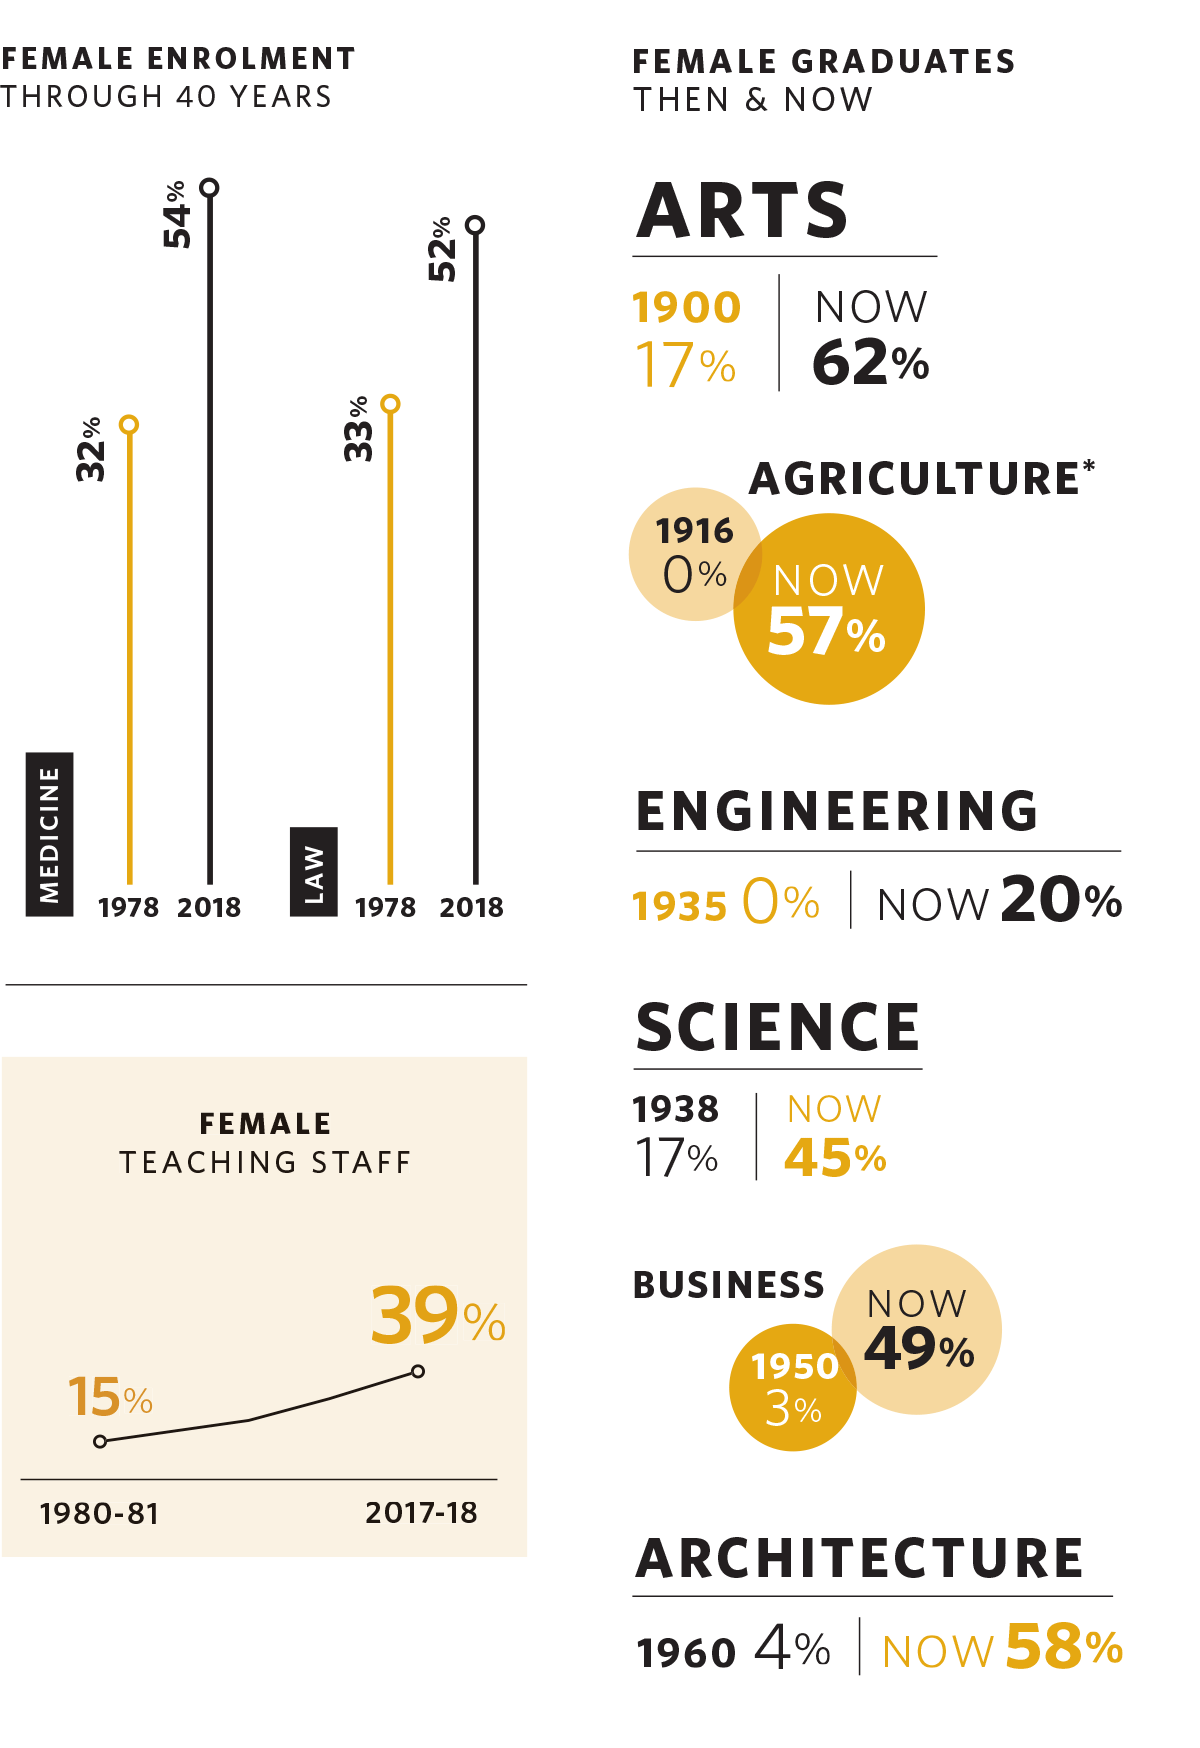 An infographic containing information on the University of Manitoba.